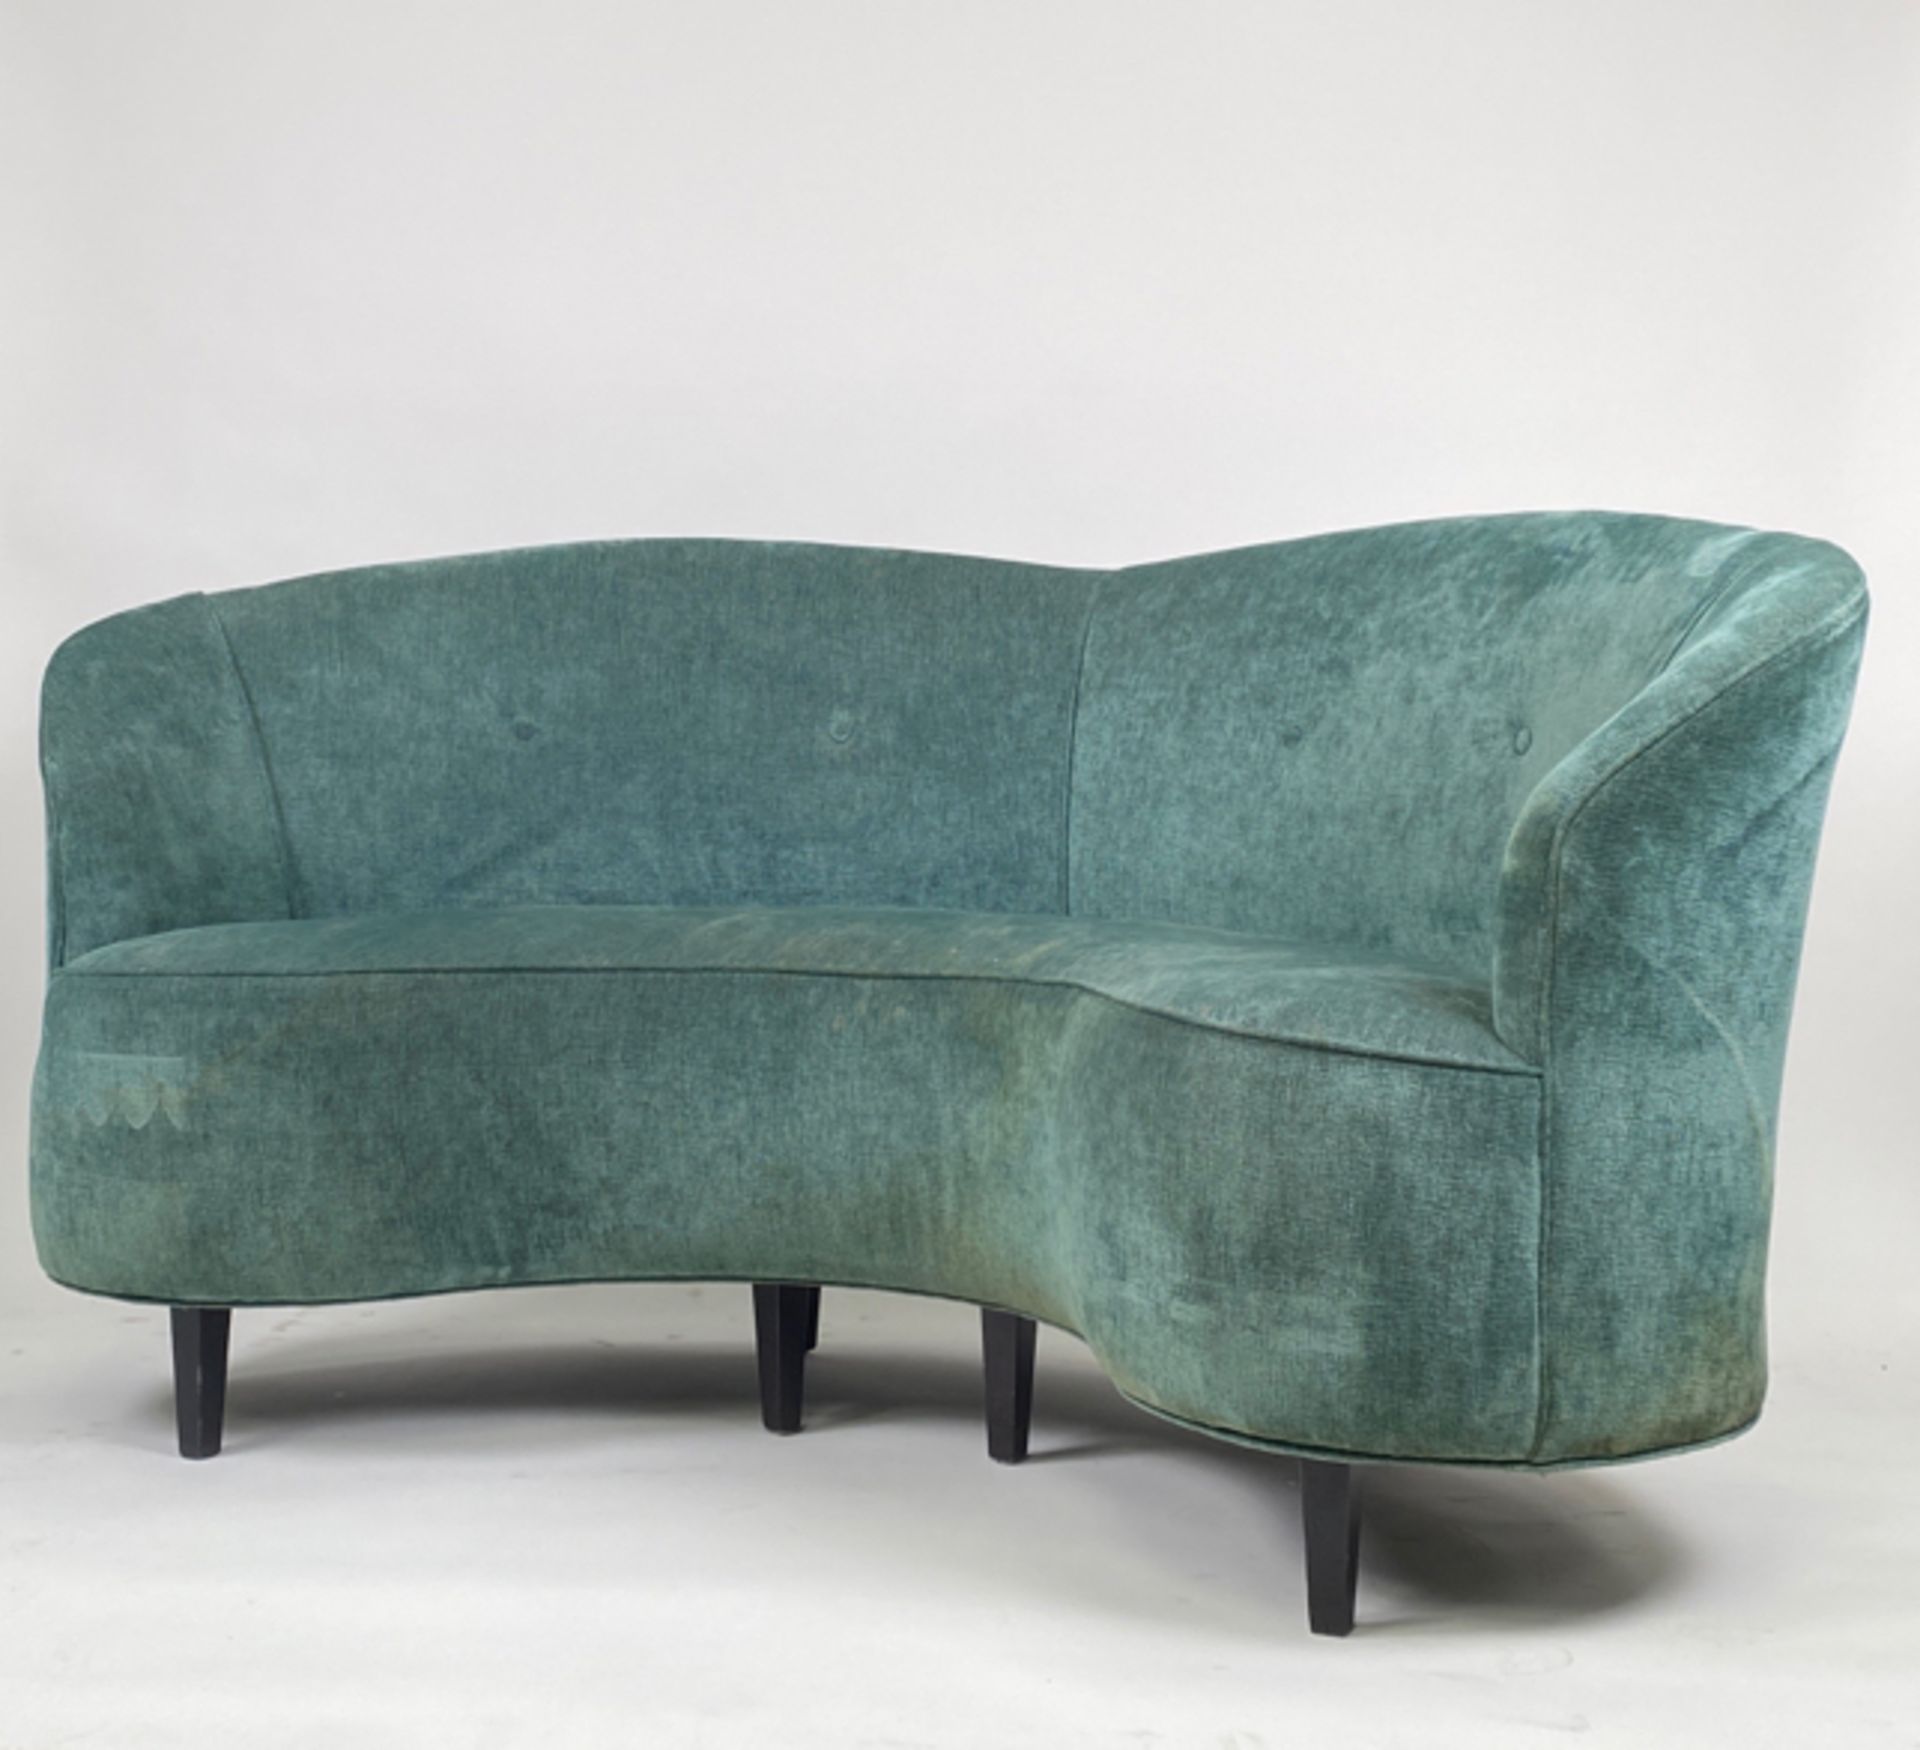 Curved Teal Sofa - Image 4 of 5